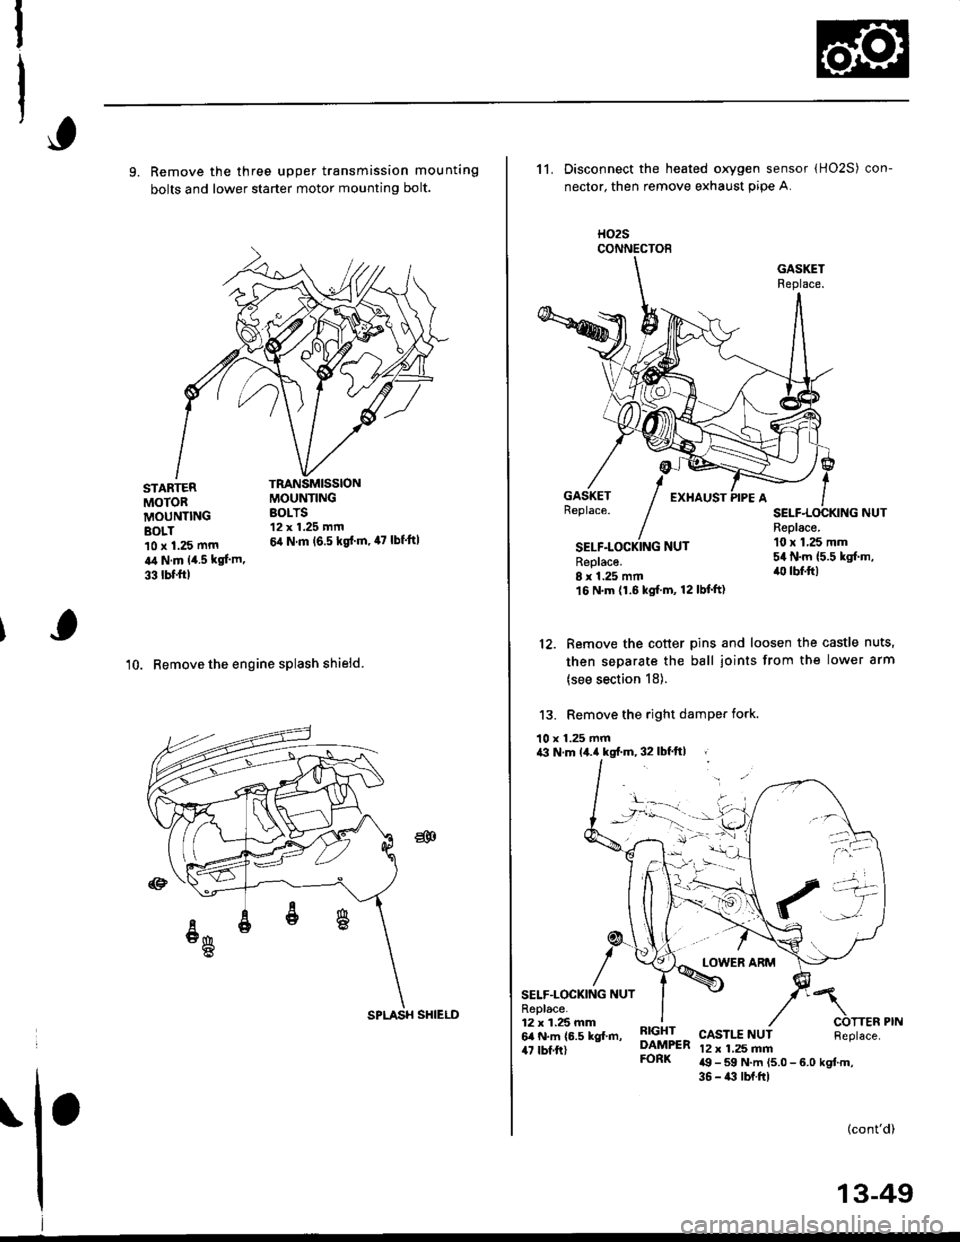 HONDA CIVIC 1996 6.G Workshop Manual 9. Remove the three upper transmission mounting
bolts and lower starter motor mounting bolt.
10. Remove the engine splash shieid.
TRANSMISSIONMOUNTINGBOLTS12 x 1.25 mm
6,1 N.m (6.5 kgd m, 47 lbfft|
